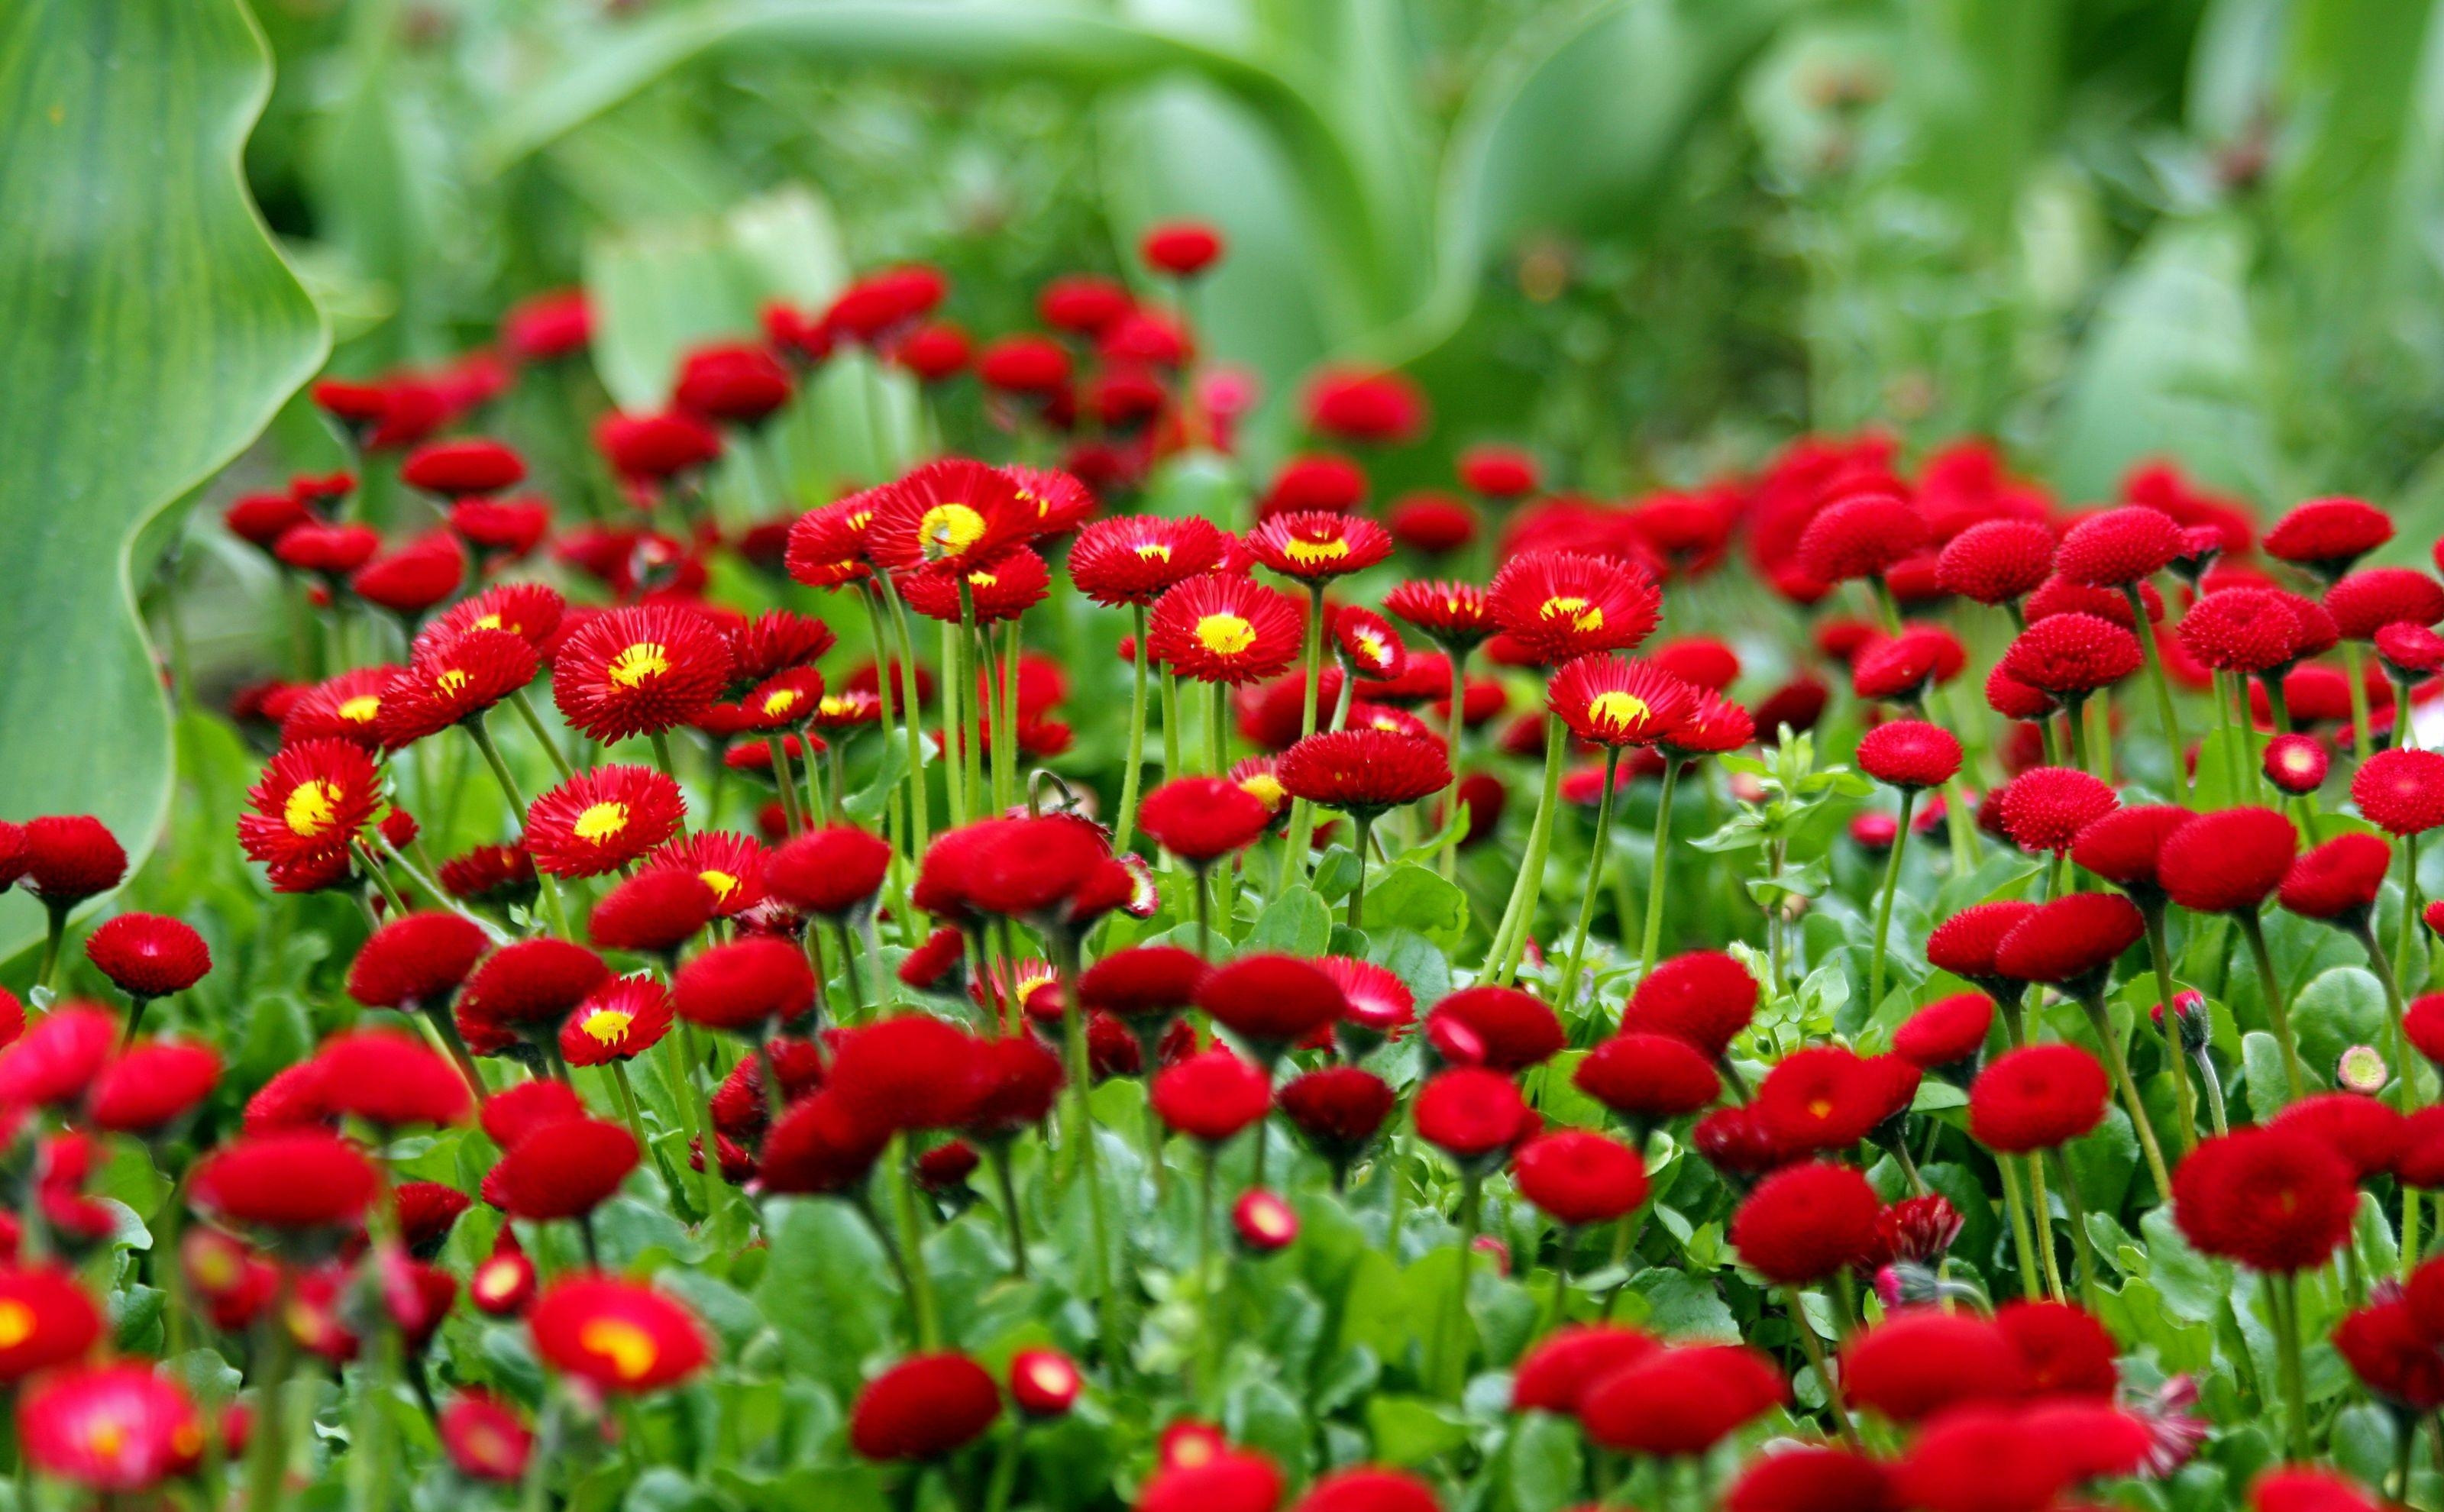 smooth, flower bed, daisies, flowers, red, blur, greens, flowerbed 1080p